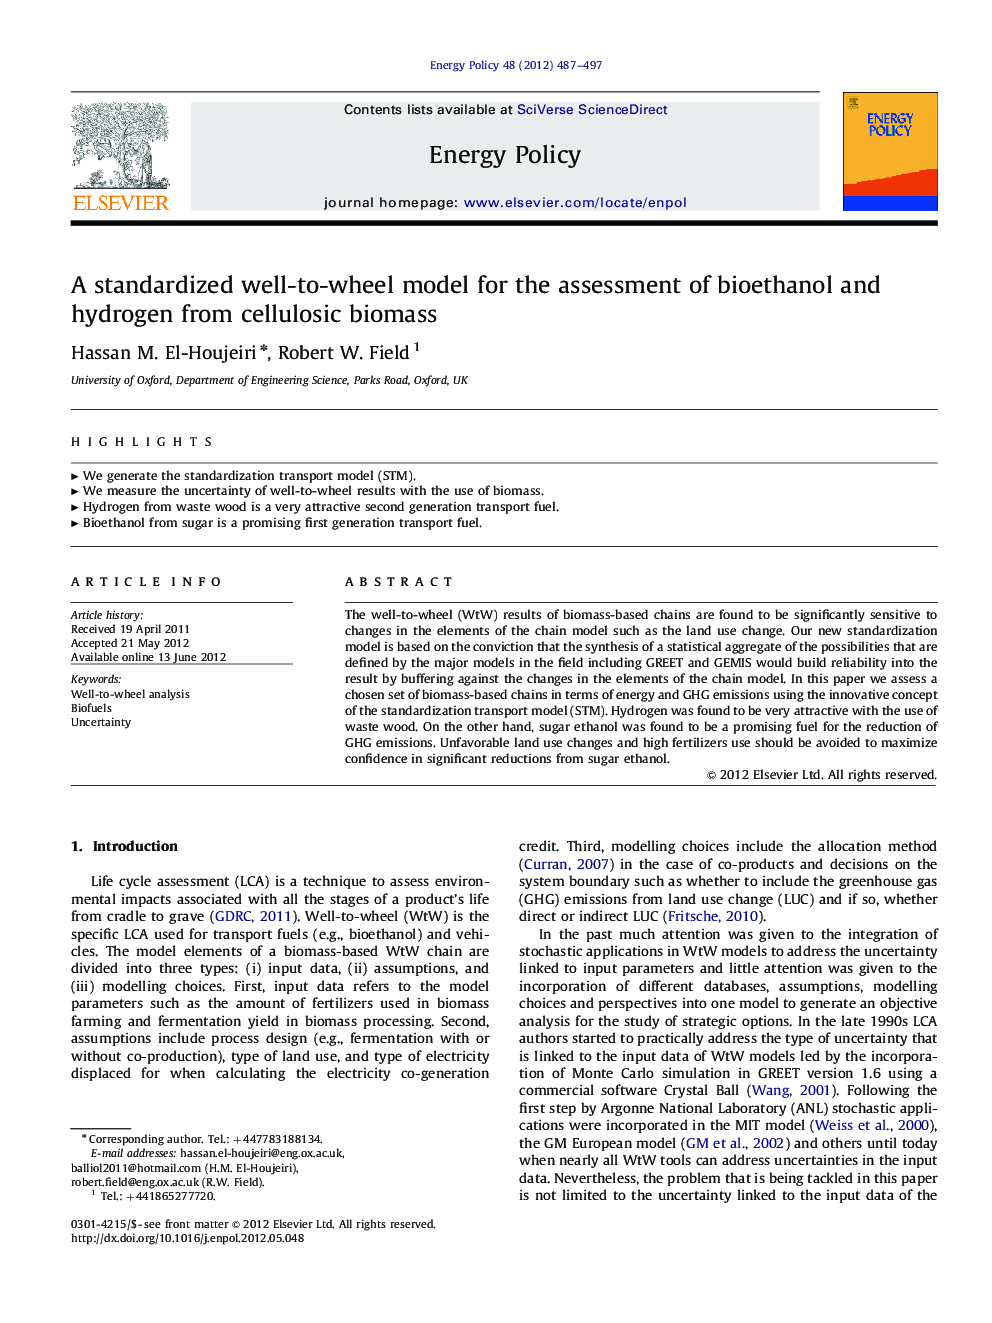 A standardized well-to-wheel model for the assessment of bioethanol and hydrogen from cellulosic biomass